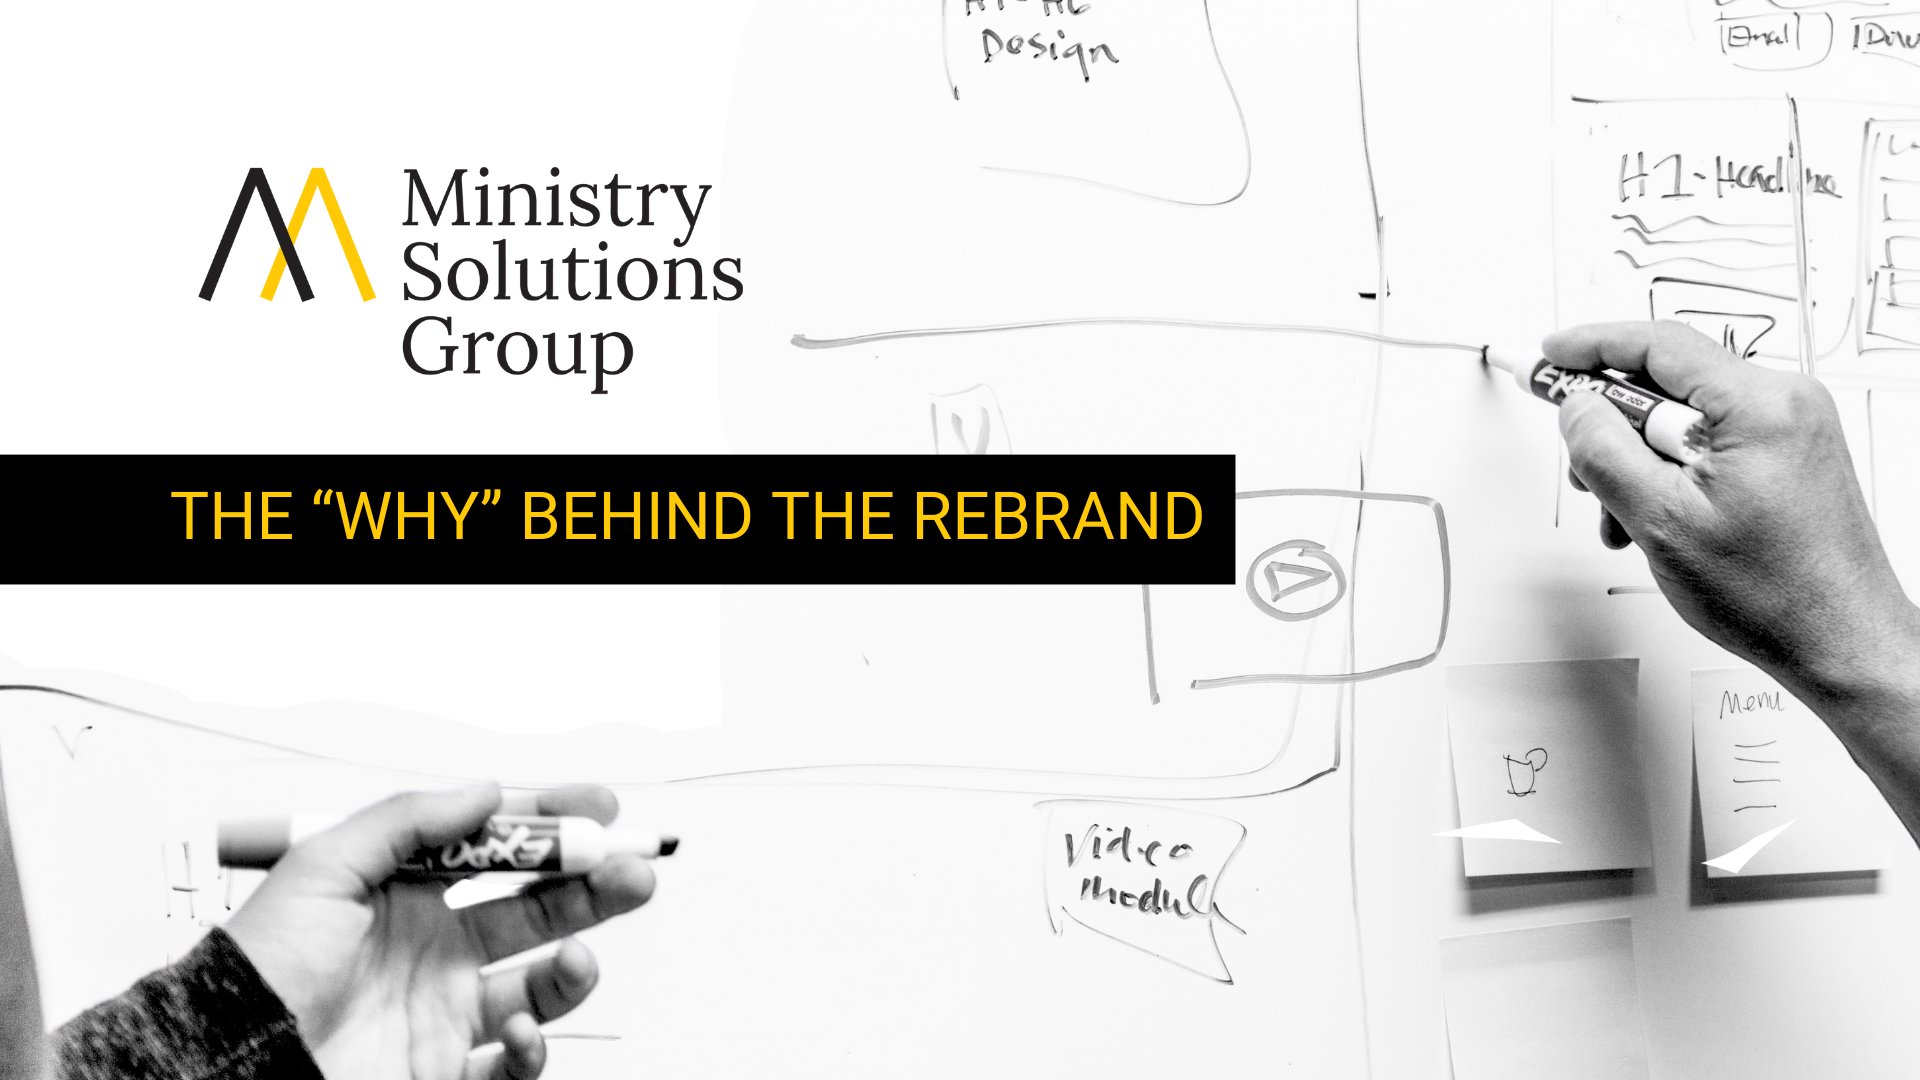 Ministry Solutions Group Rebrand